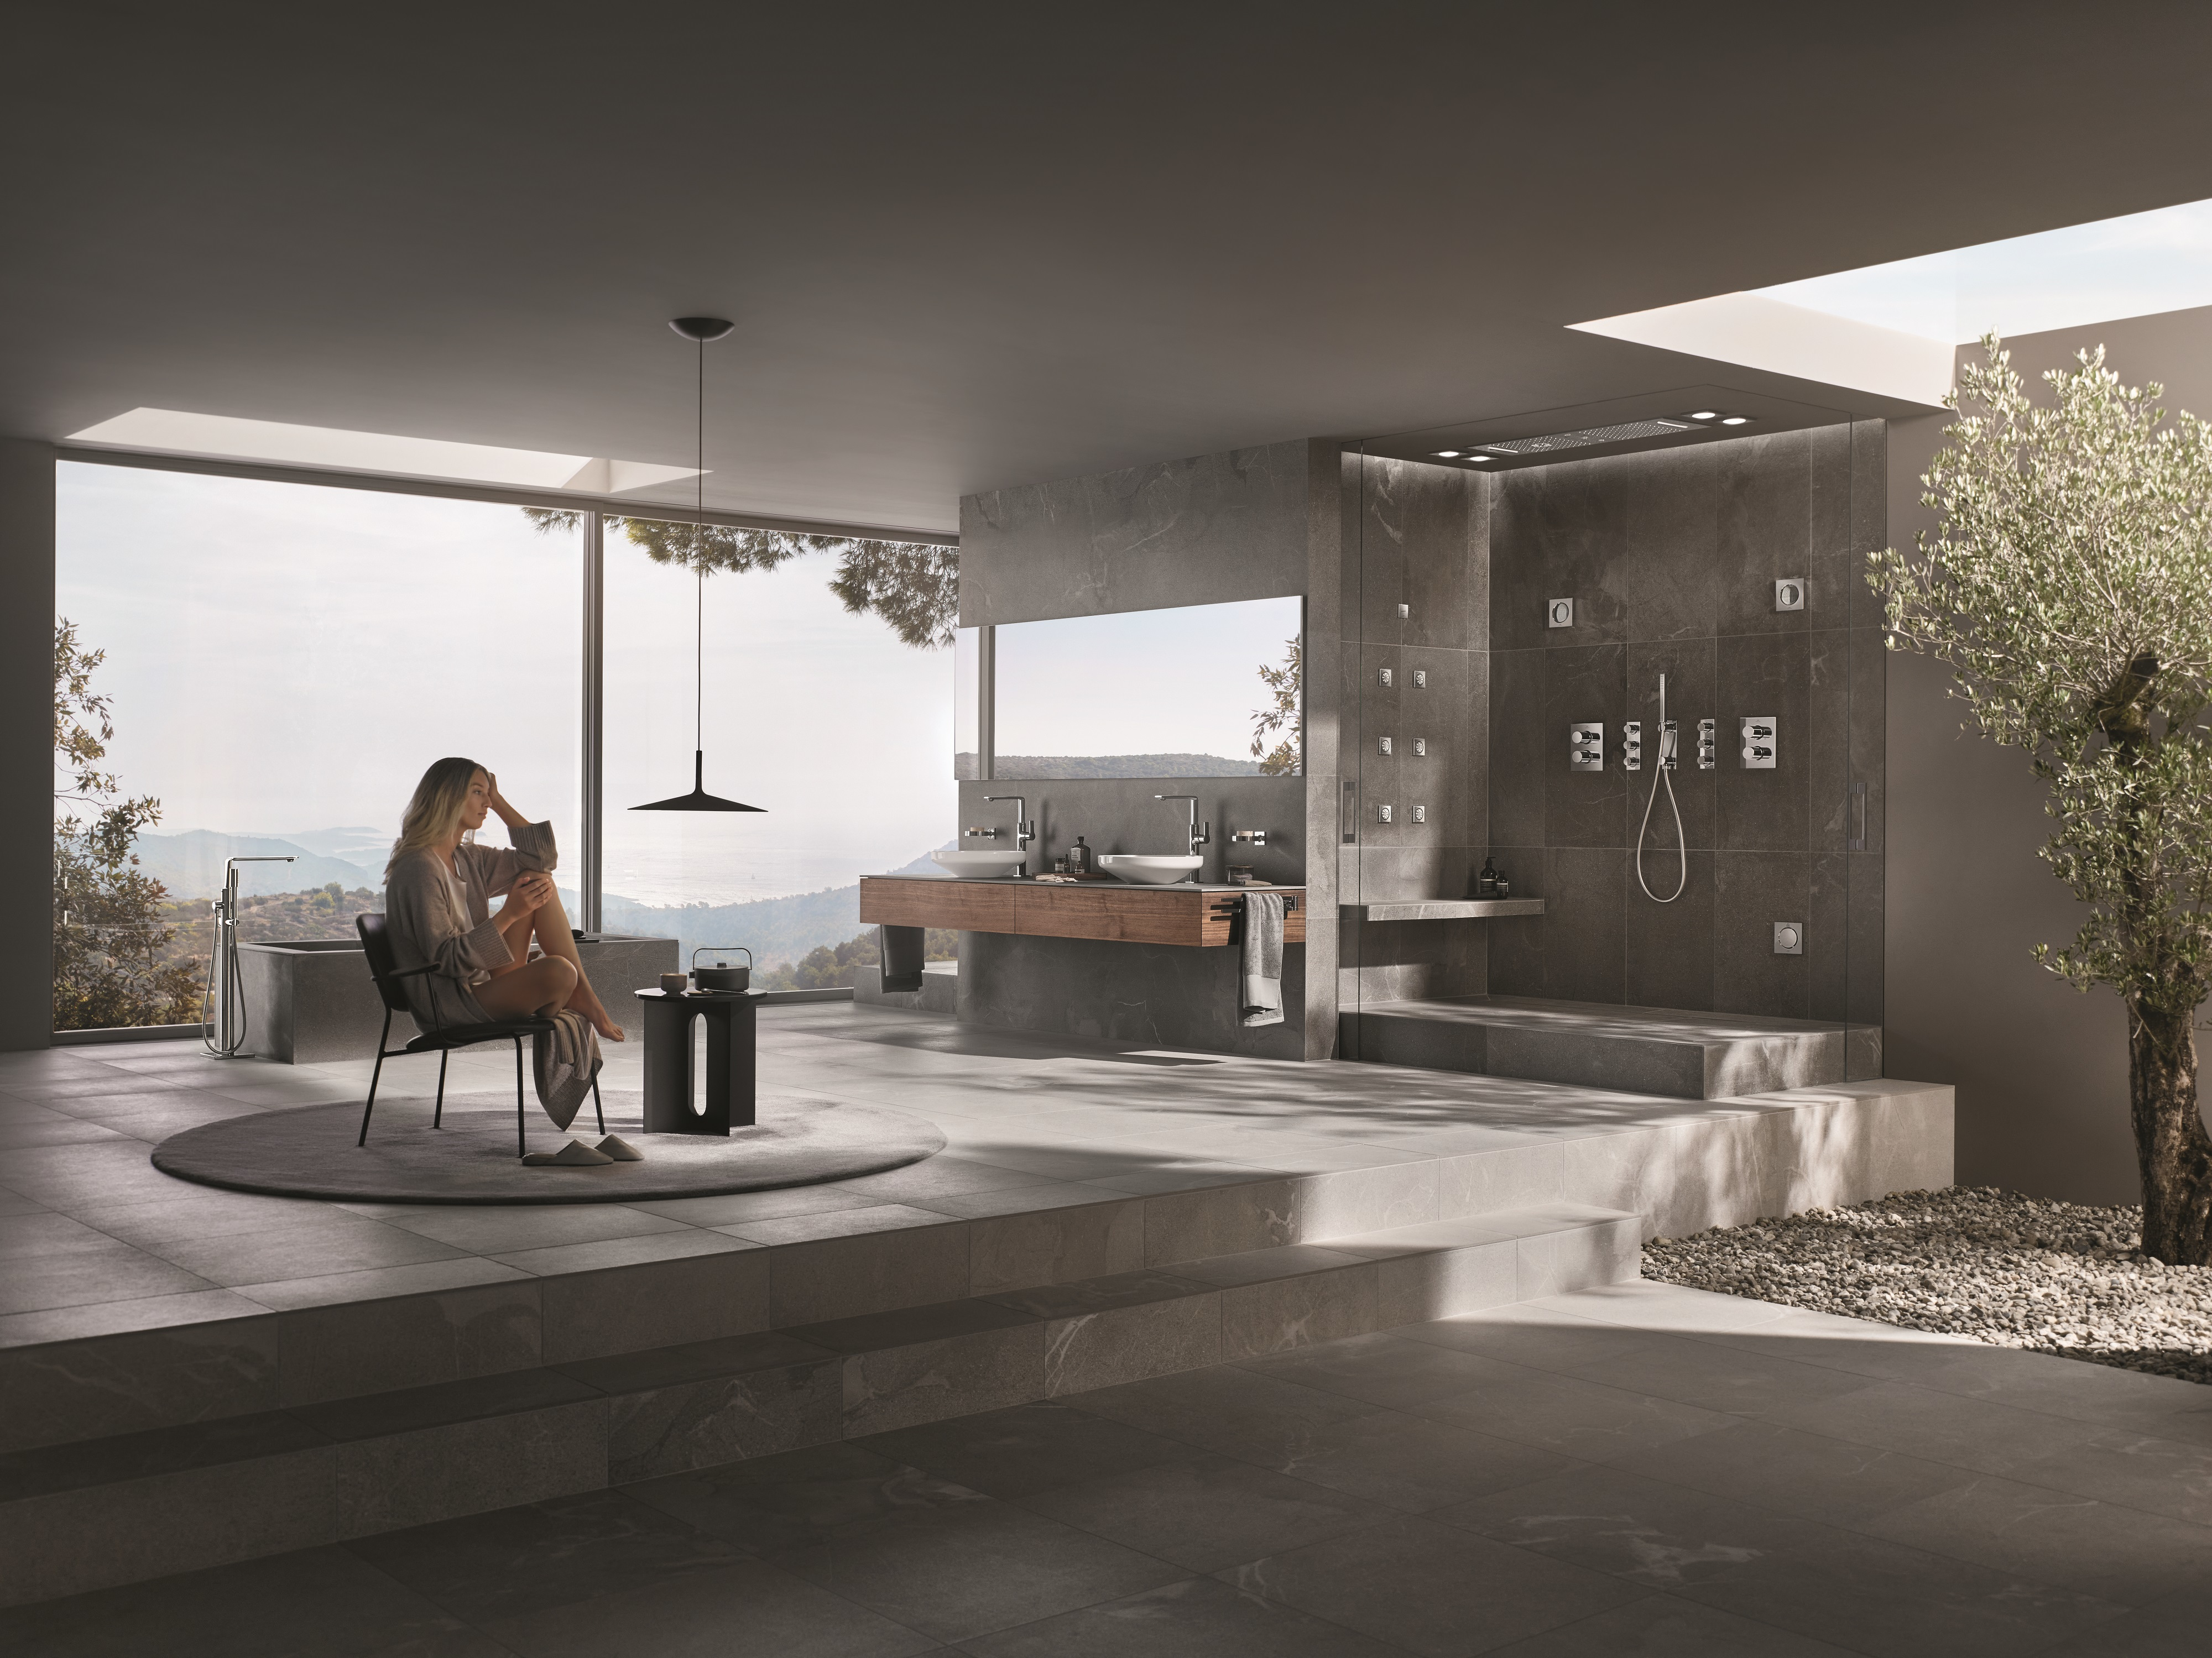 GROHE SPA Brand Relaunch